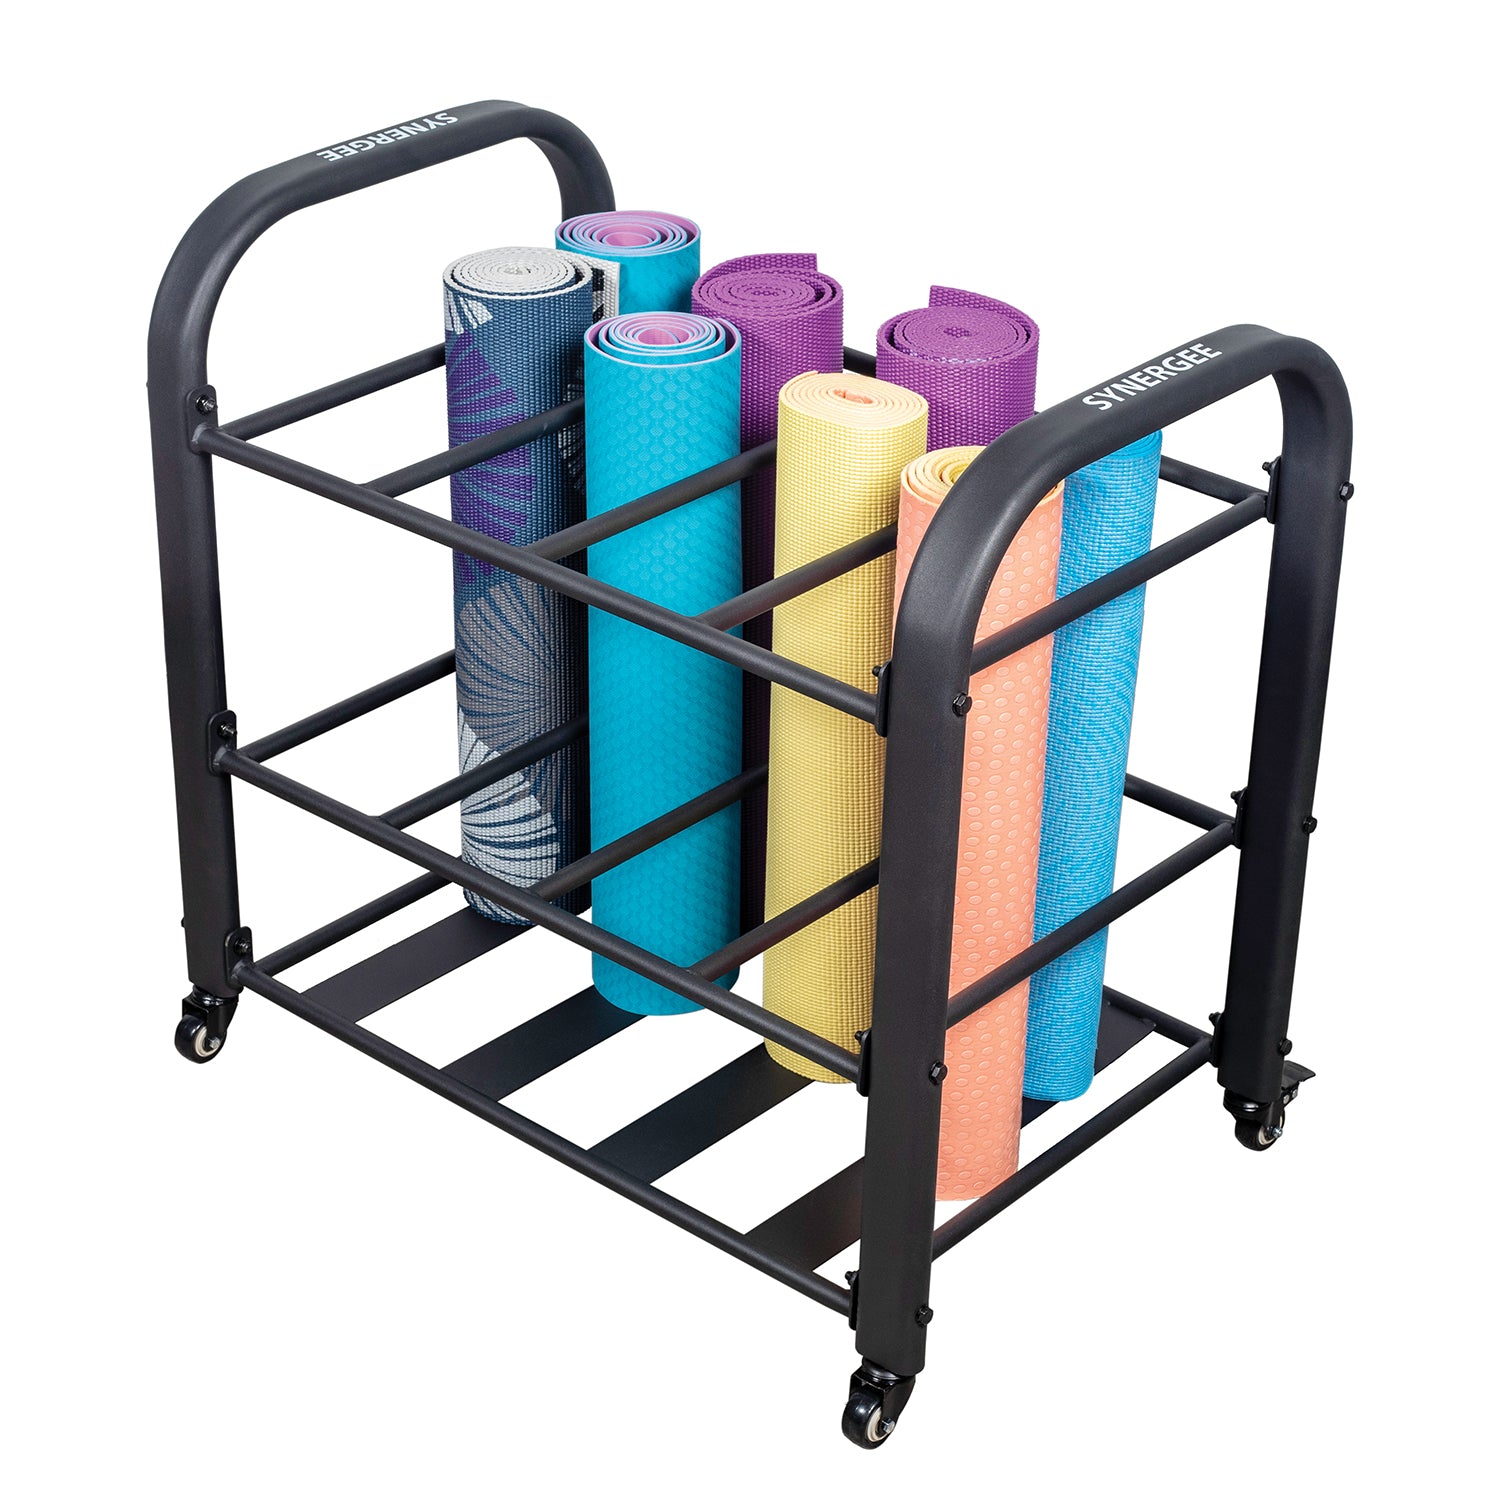  Home Gym/Studio/Workout Room Yoga Mat Storage Holder, Metal 5- Shelf Foam Roller Display Rack Stand, Holds 10-20 Exercise Mats (Color :  Gold, Size : 58×40×130cm) : Sports & Outdoors